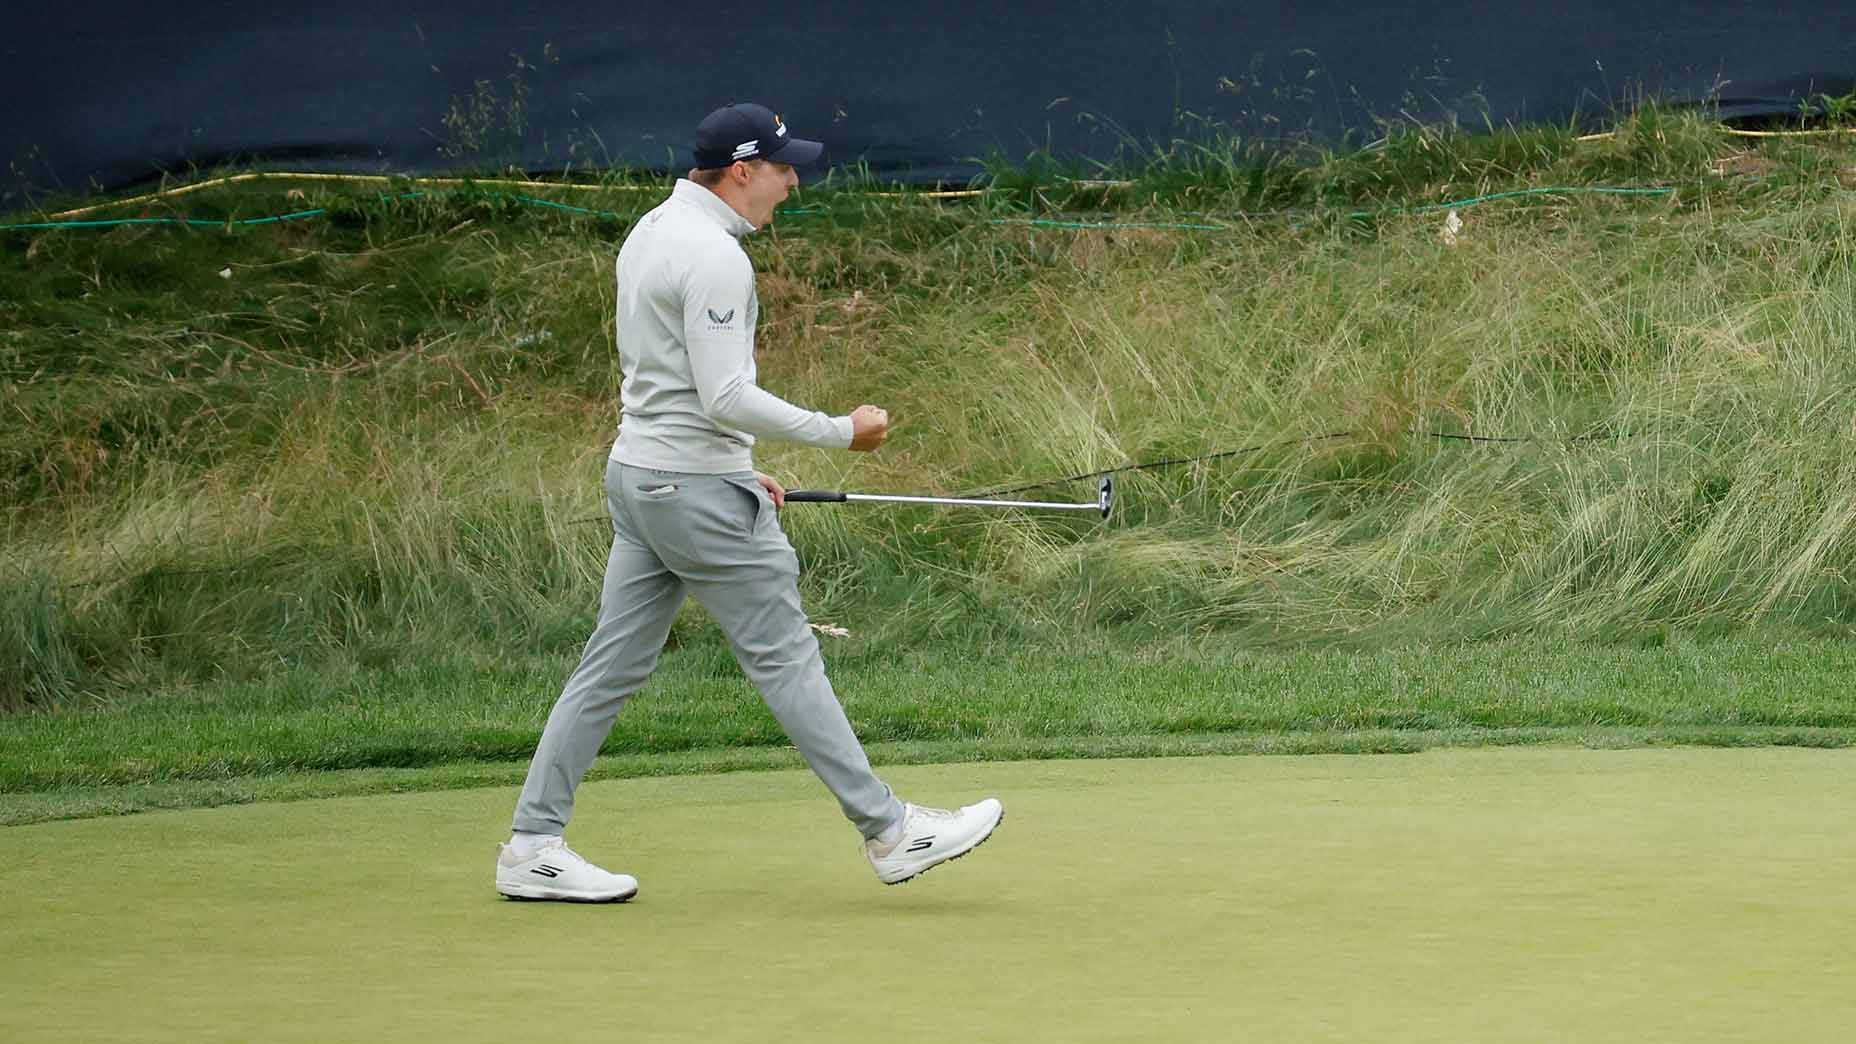 Matt Fitzpatrick celebrates after making a birdie putt on the 13th hole on Sunday at The Country Club.